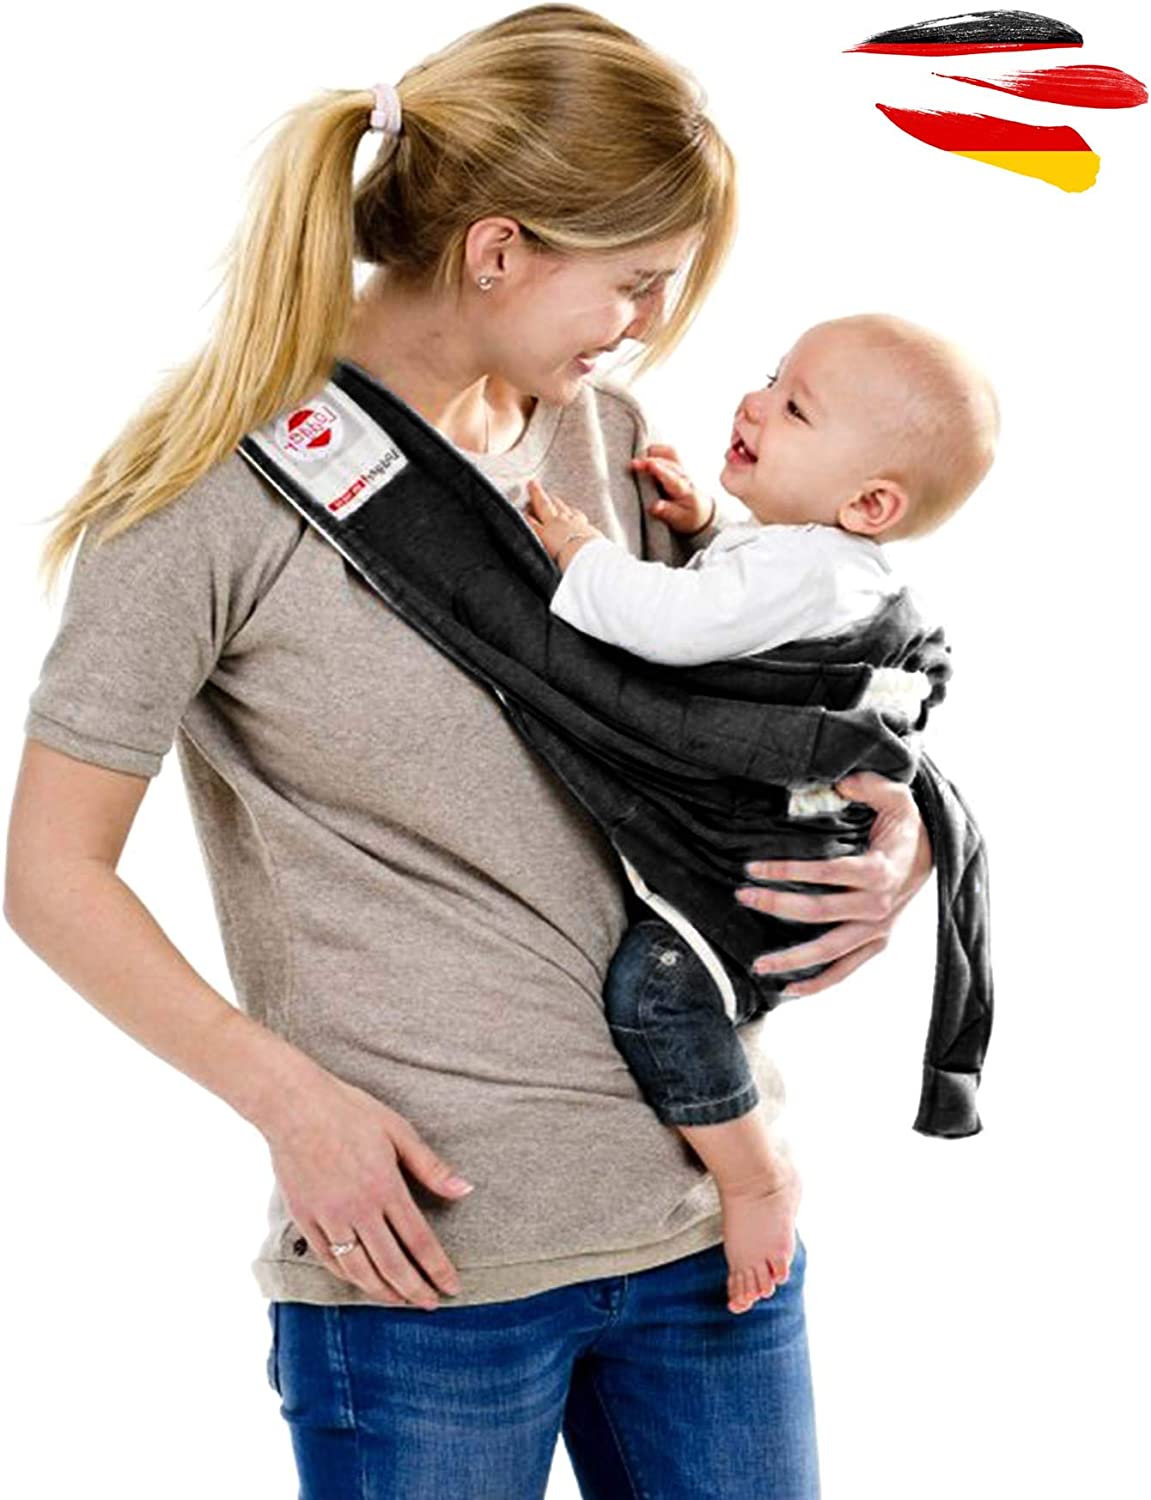 Lodger Shelter 2.0 3-in-1 Baby Carrier Baby Sling Baby Sling Travel Rug for Baby & Parents, from Birth to 18 months (12 kg Maximum Load), Secure Locking Mechanism Carrying for Babies and Children Beautiful Design New And In Original Packaging